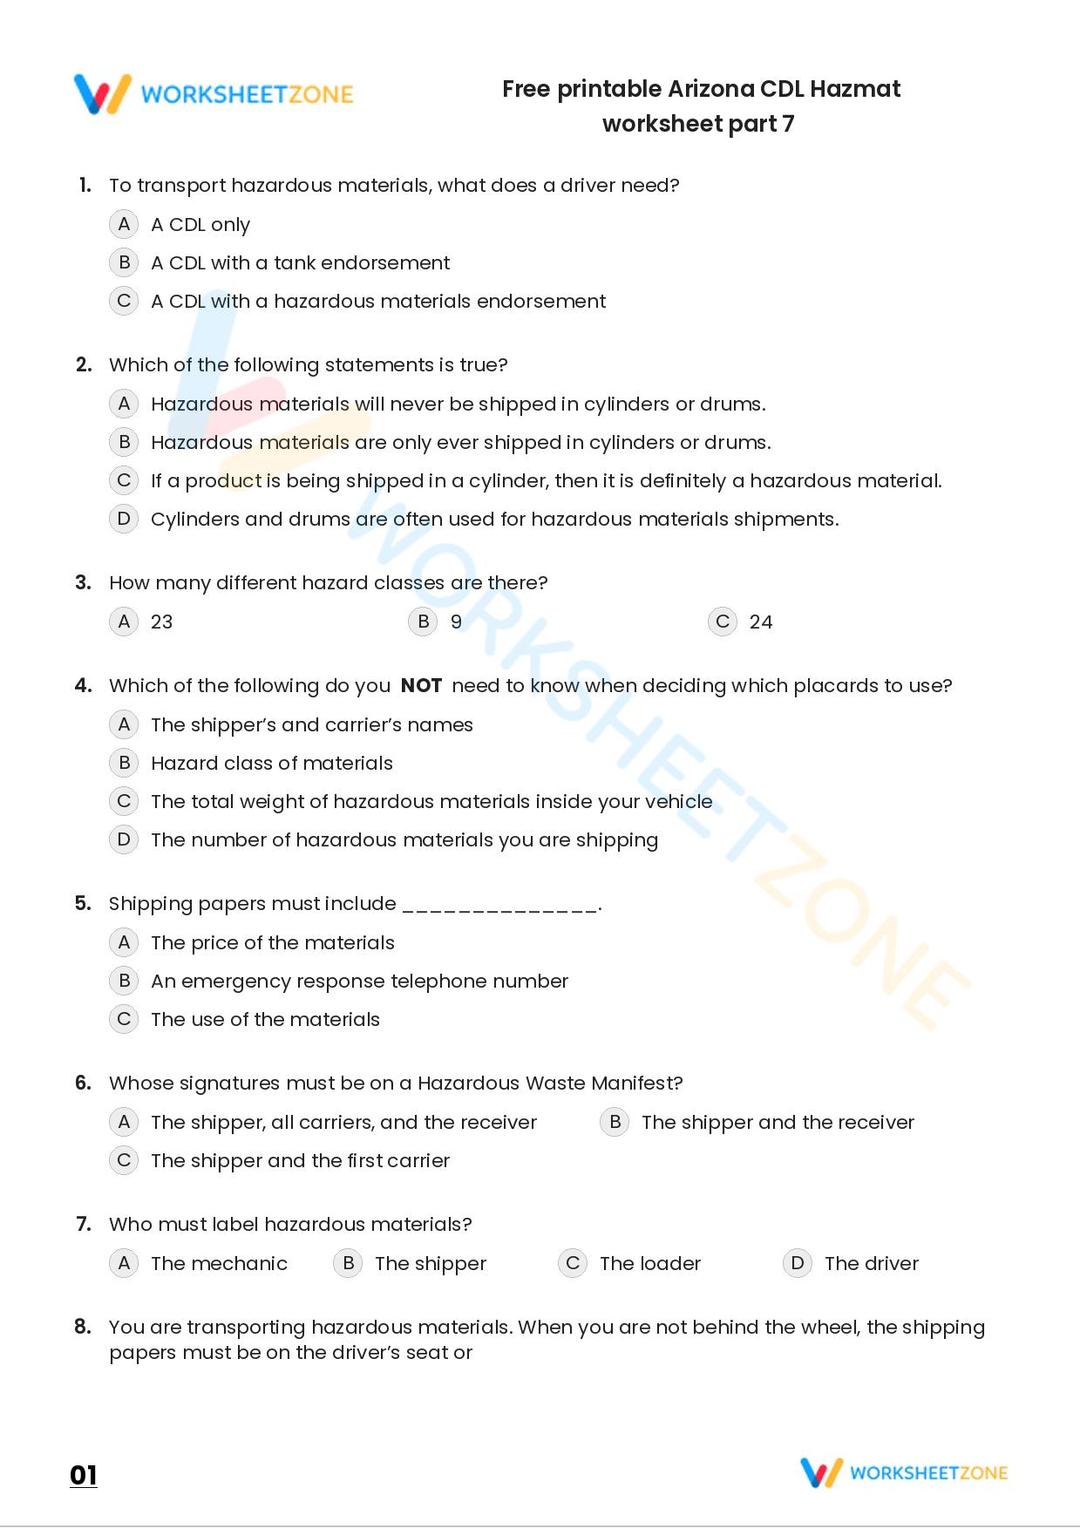 free-printable-hazmat-questions-and-answers